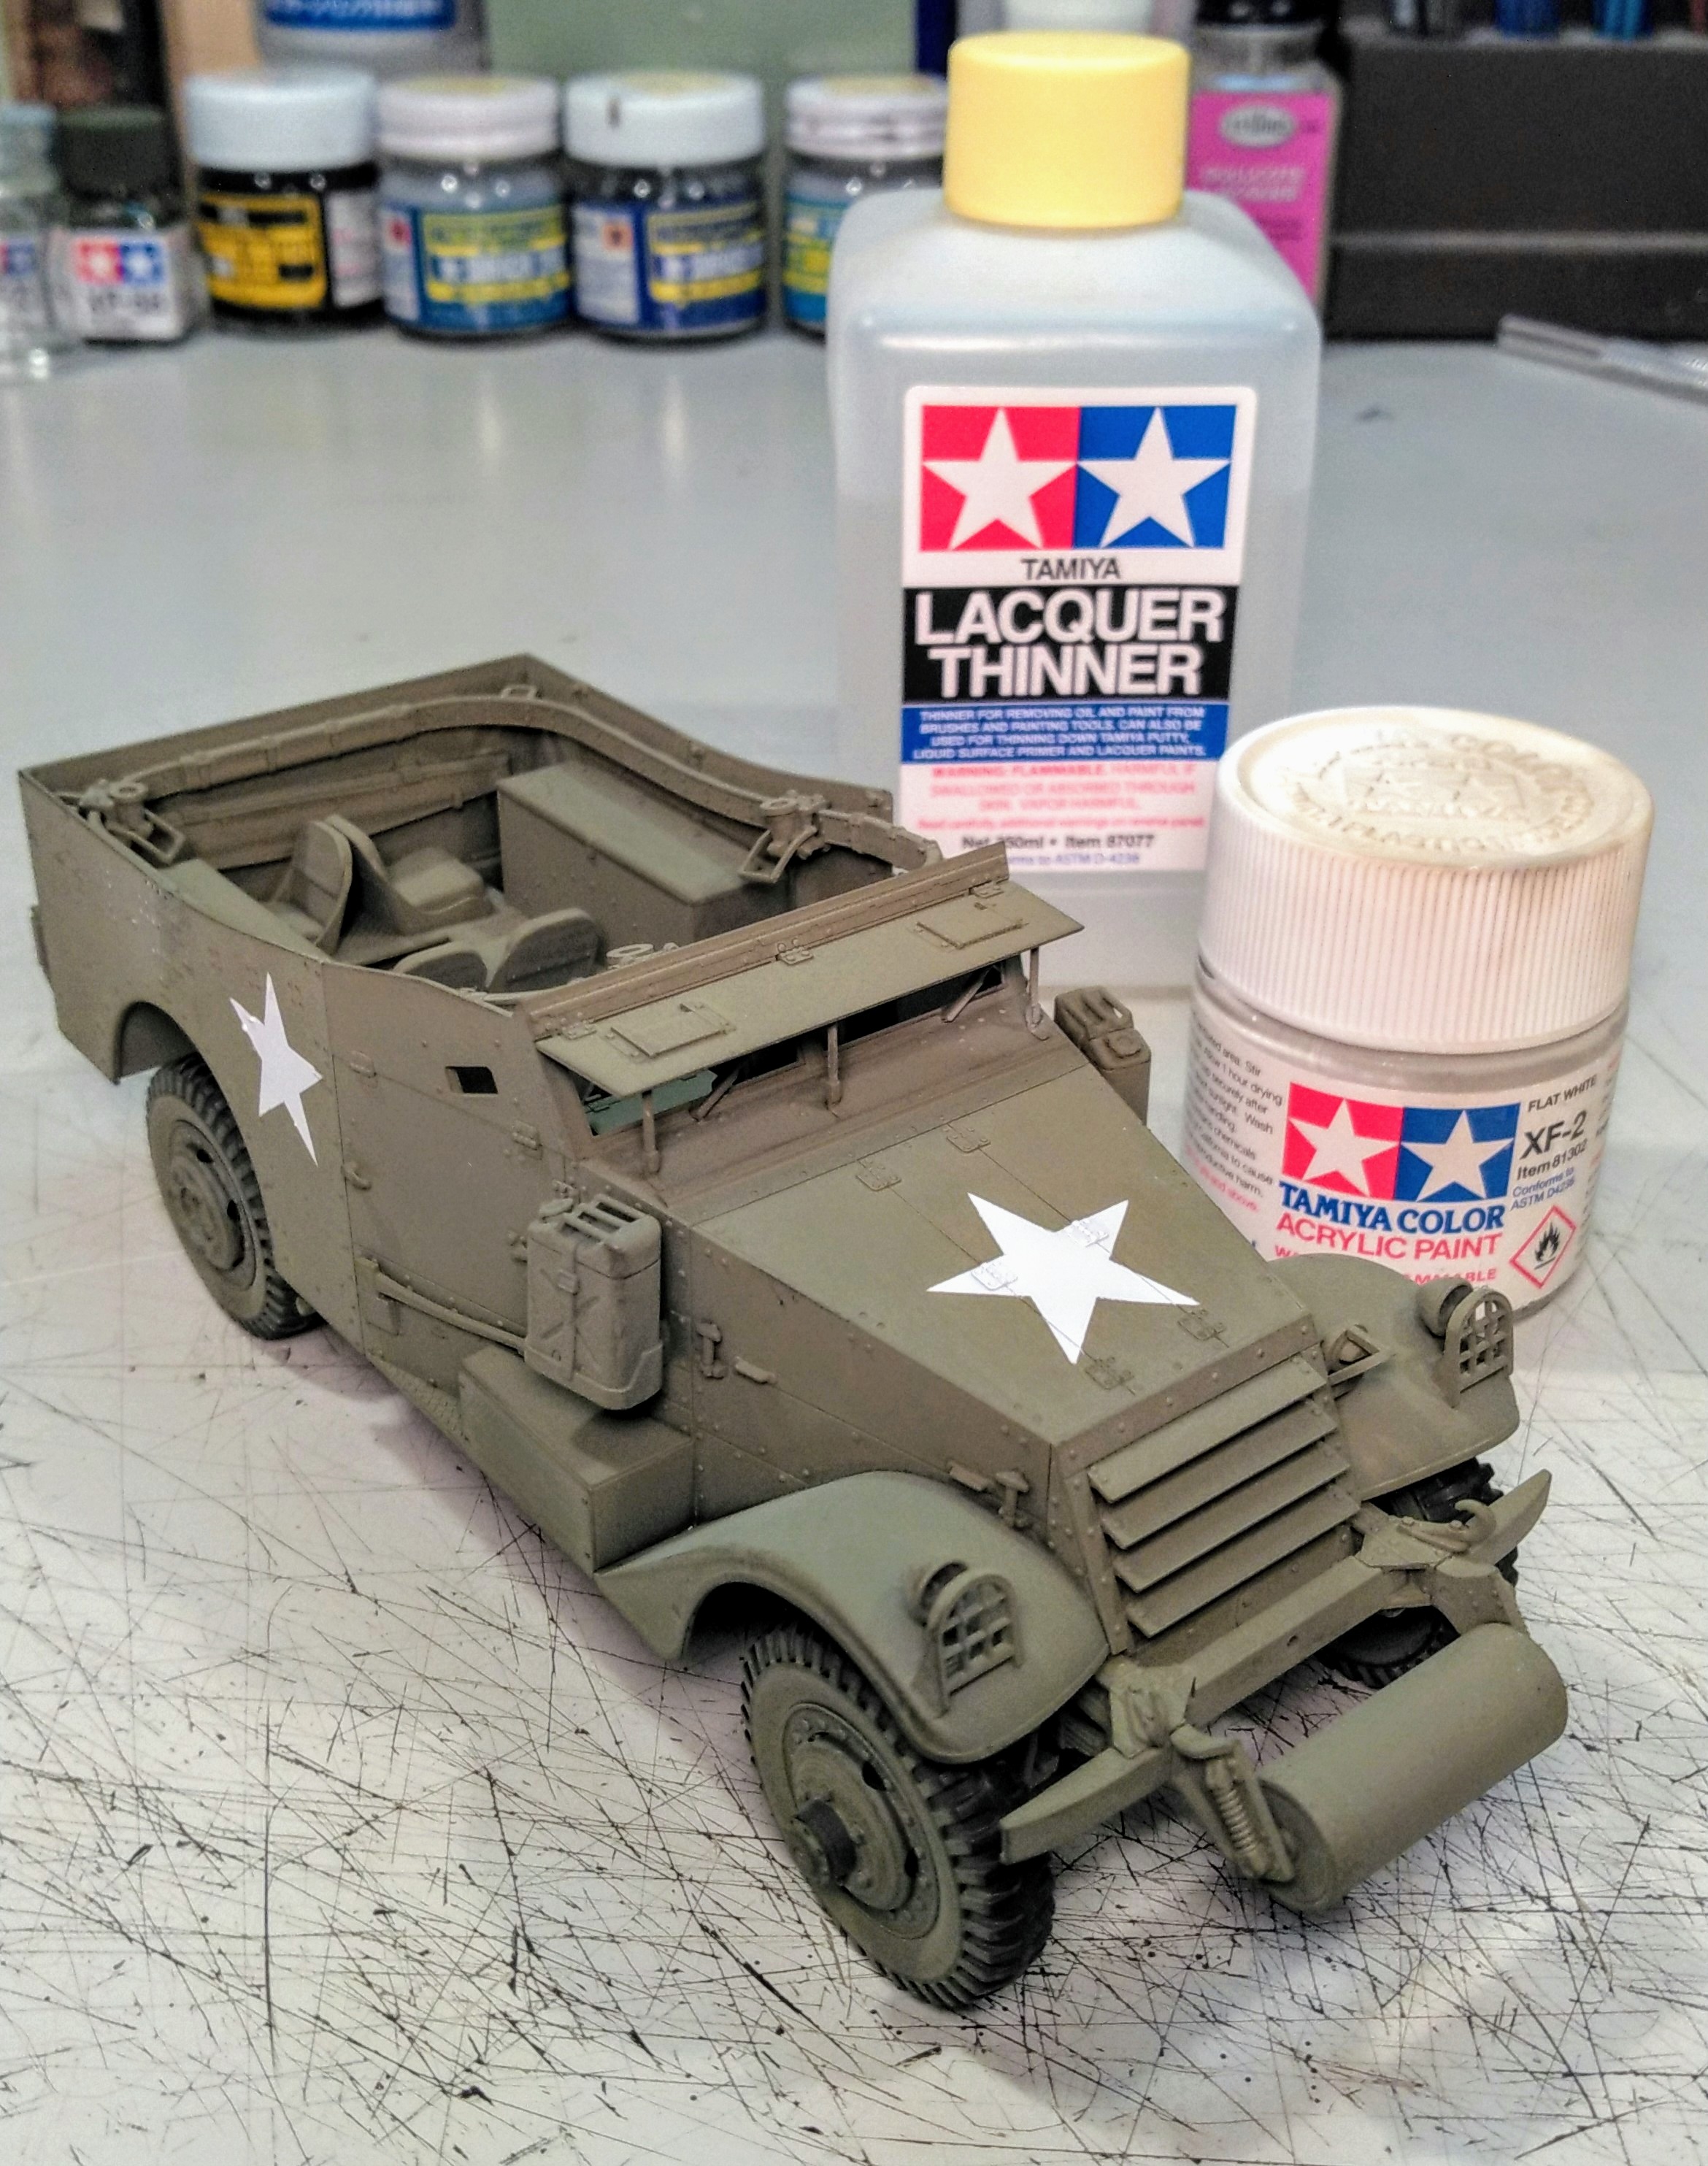 What's the best way to remove tamiya epoxy putty off my stowage